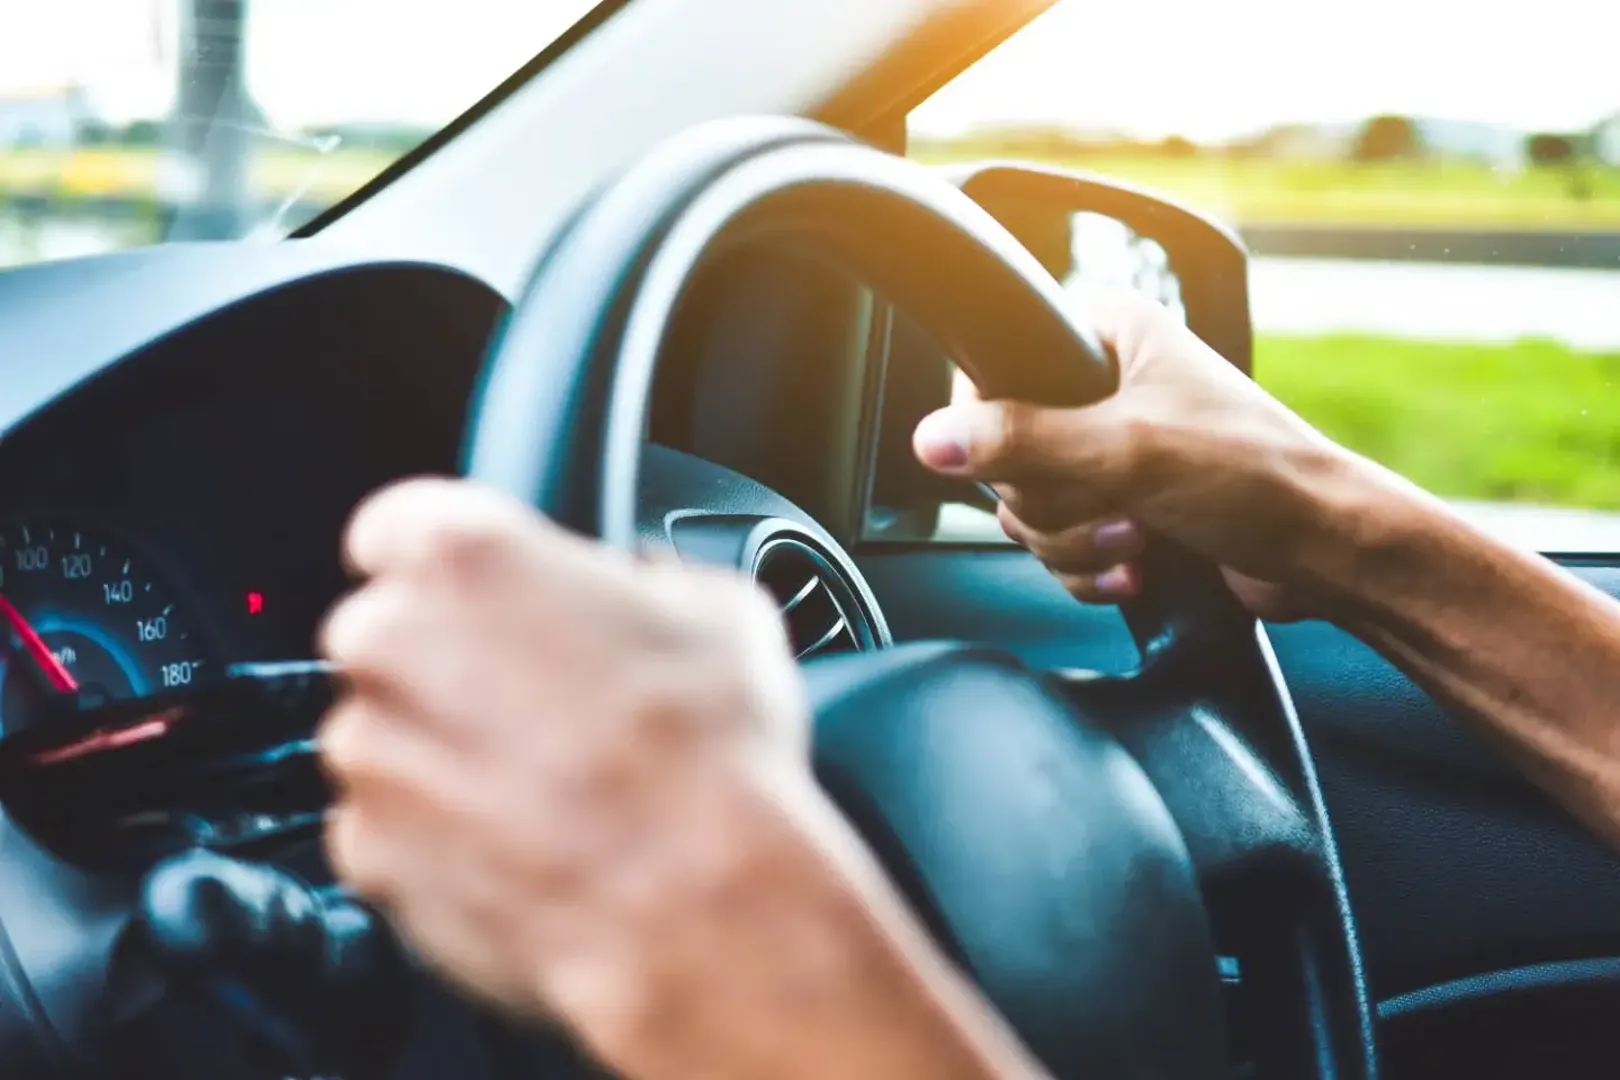 Both hands of a person on the steering wheel of a car